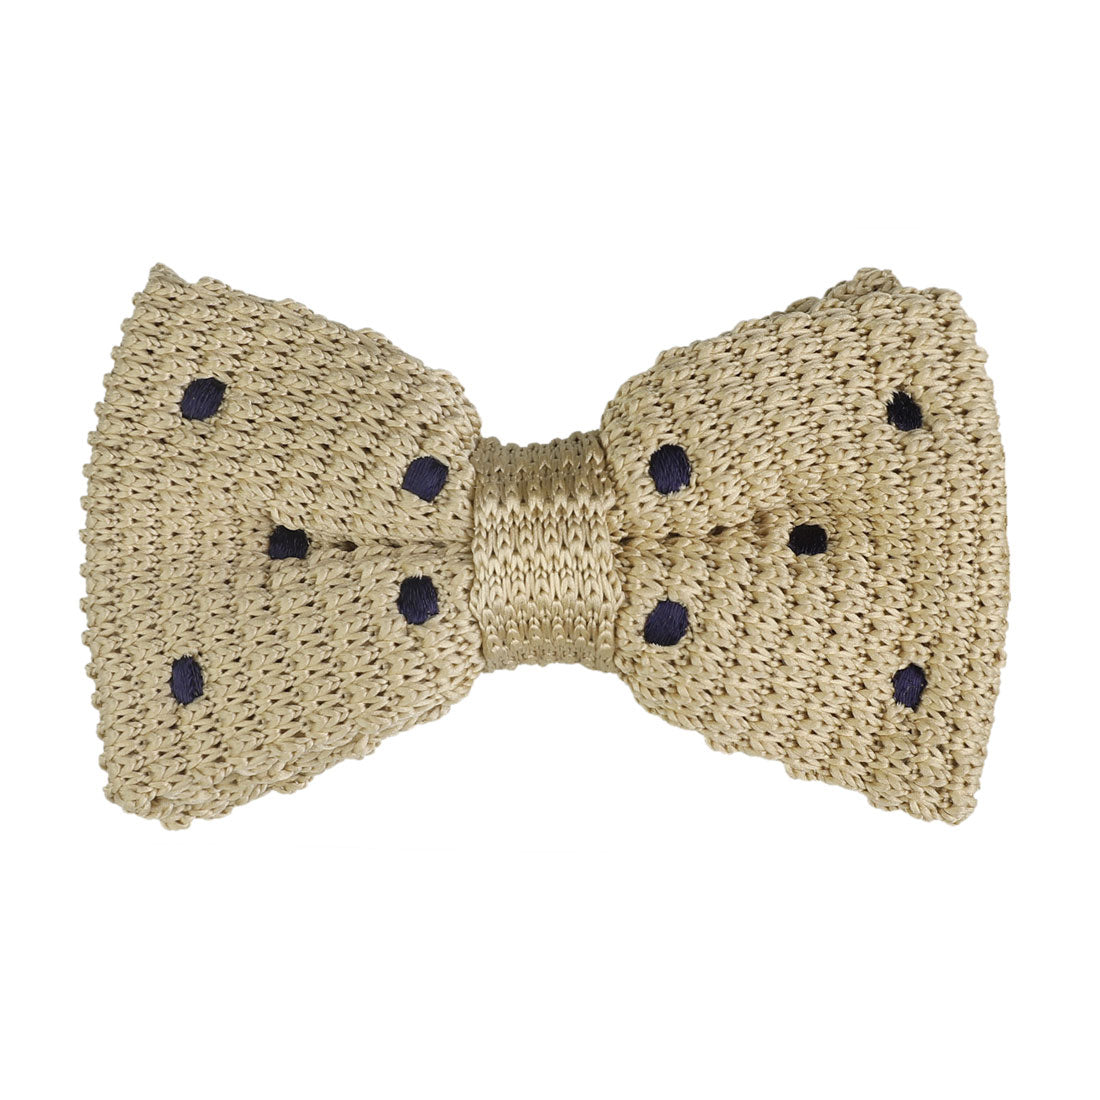 Allegra K Polka Dots Bow Ties Adjustable Strap Pre-tied Knitted Bowties